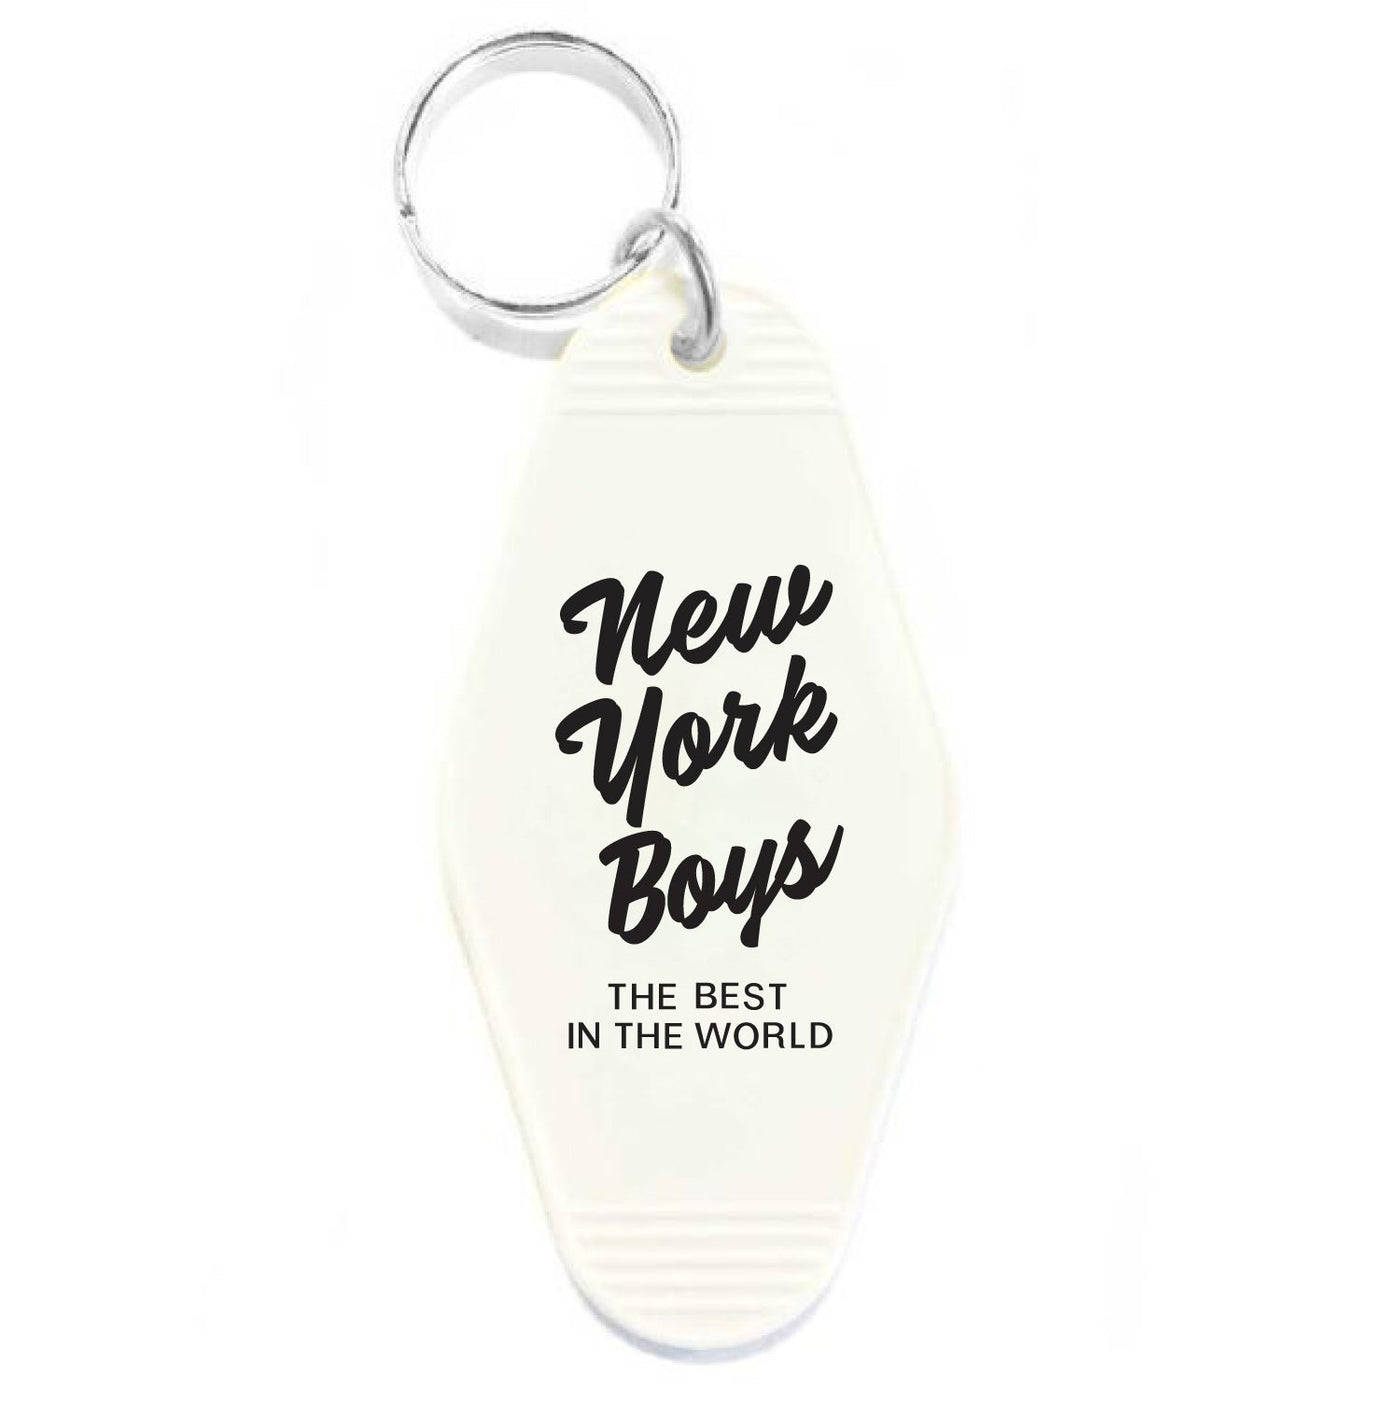 Three Potato Four New York Boys - The Best in The World Key Tag